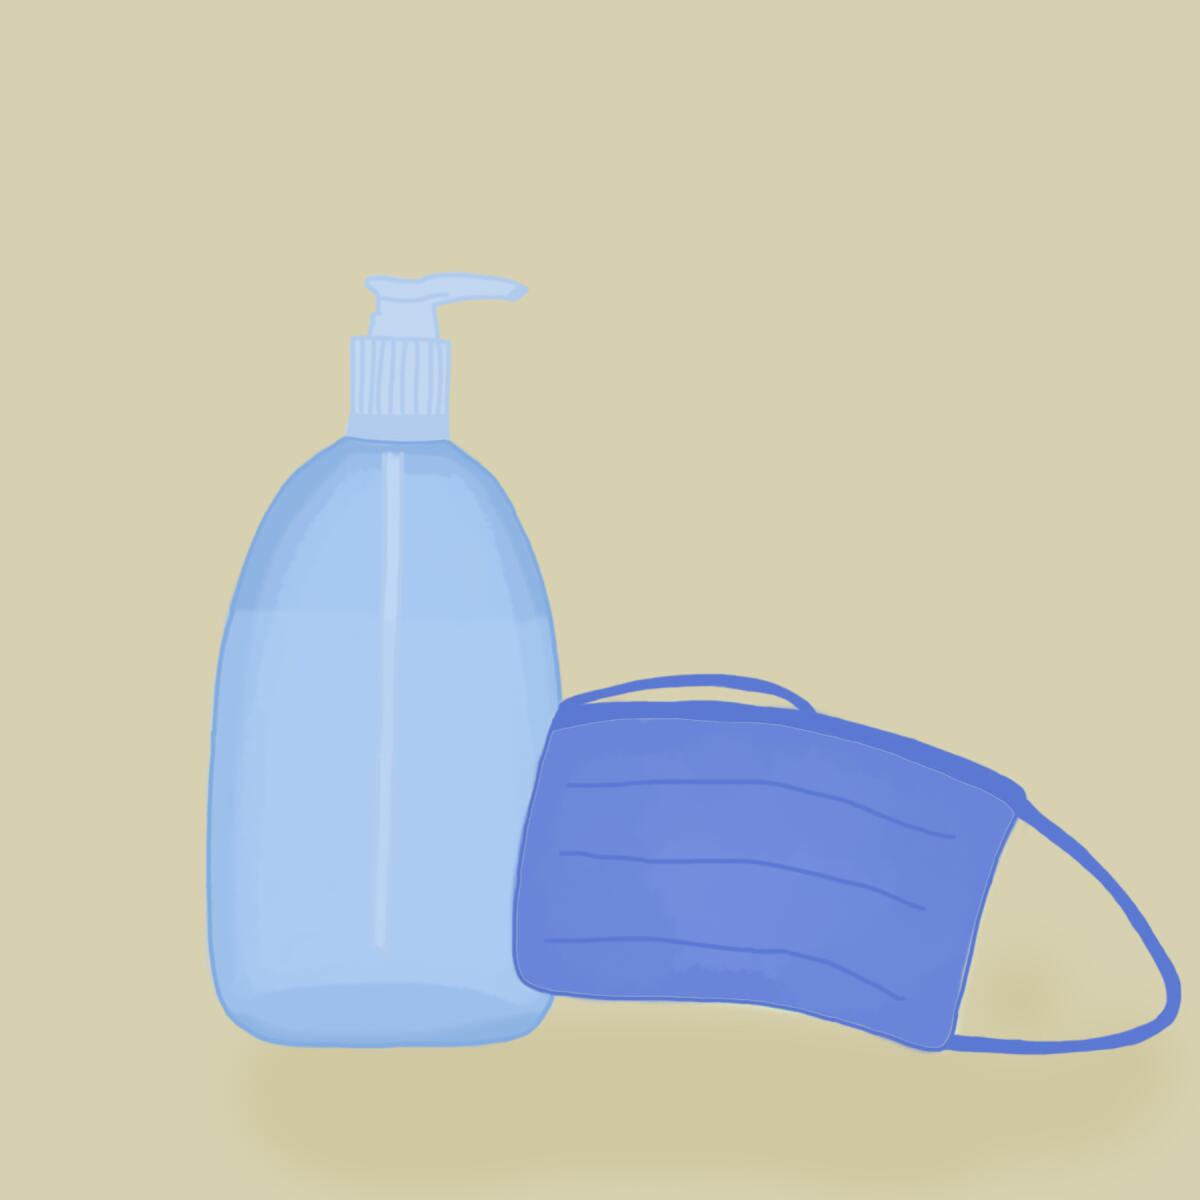 Illustration of a bottle of hand sanitizer and a face mask.